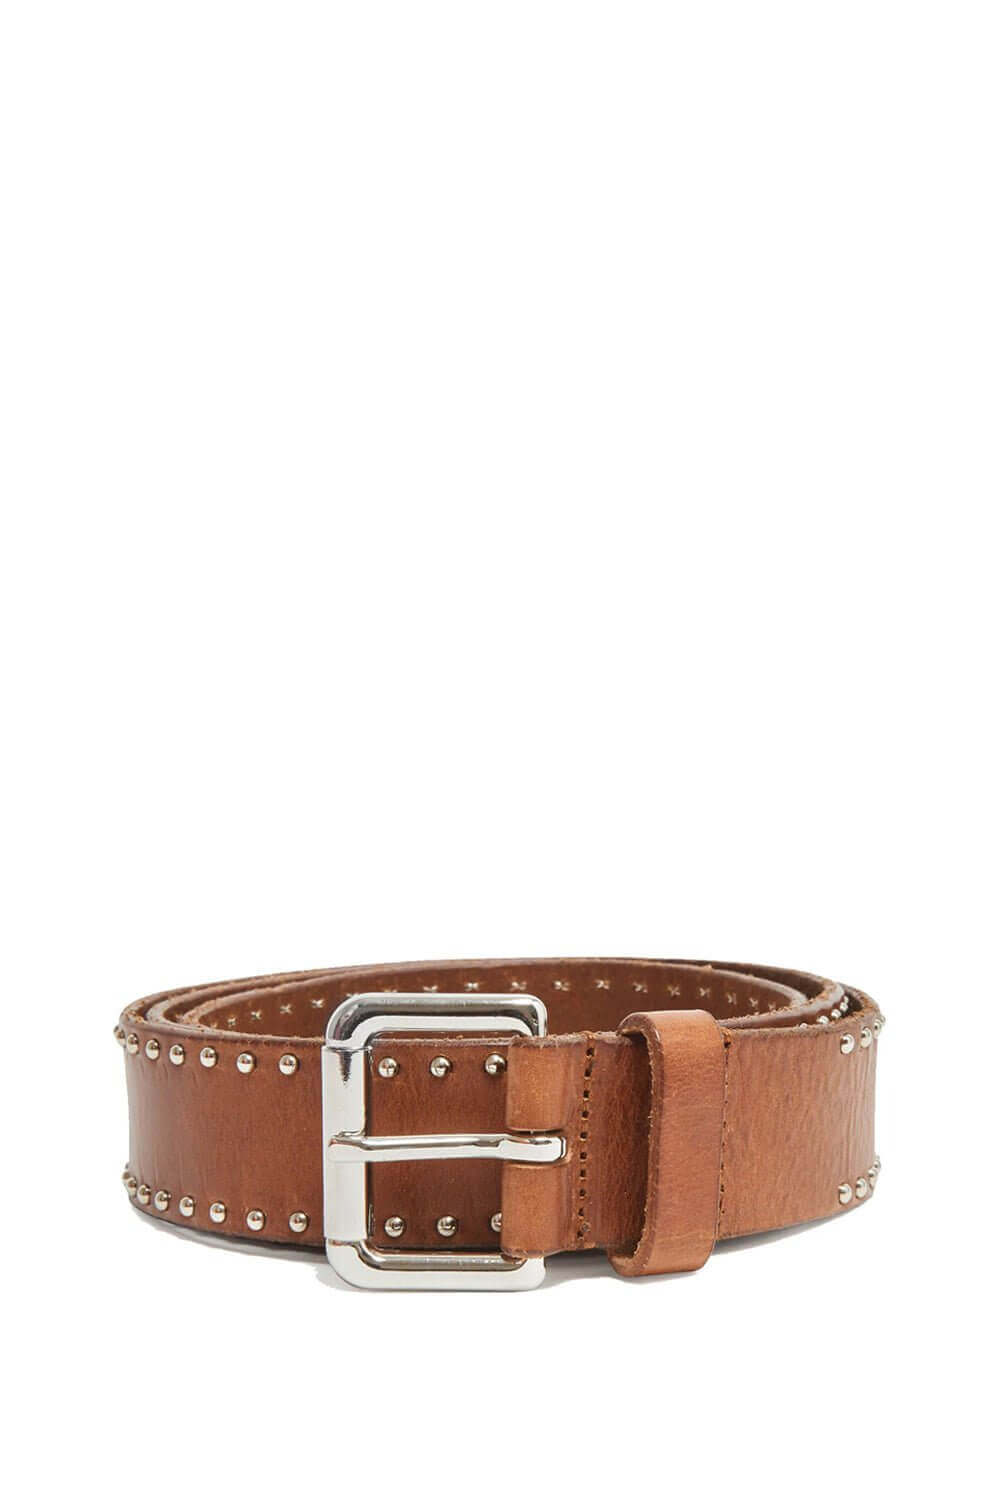 BASIC BELT Cognac leather belt, metal buckle, decorated with studs. Height: 3 cm. Made in Italy HTC LOS ANGELES